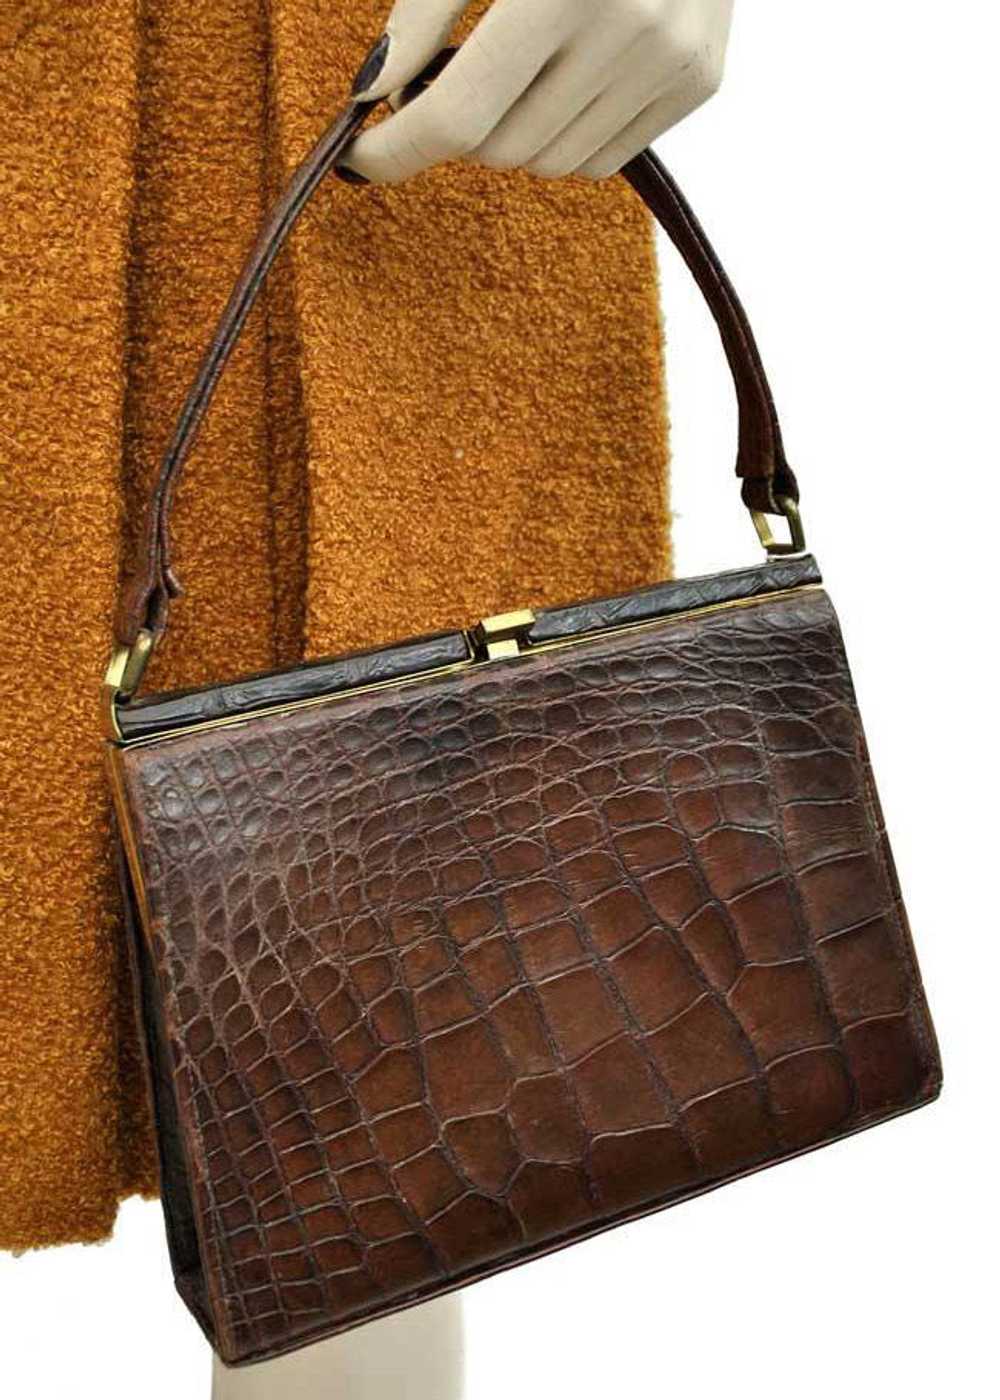 Gucci Alligator Bags - 10 For Sale on 1stDibs | gucci alligator purse,  gucci gators, alligator gucci